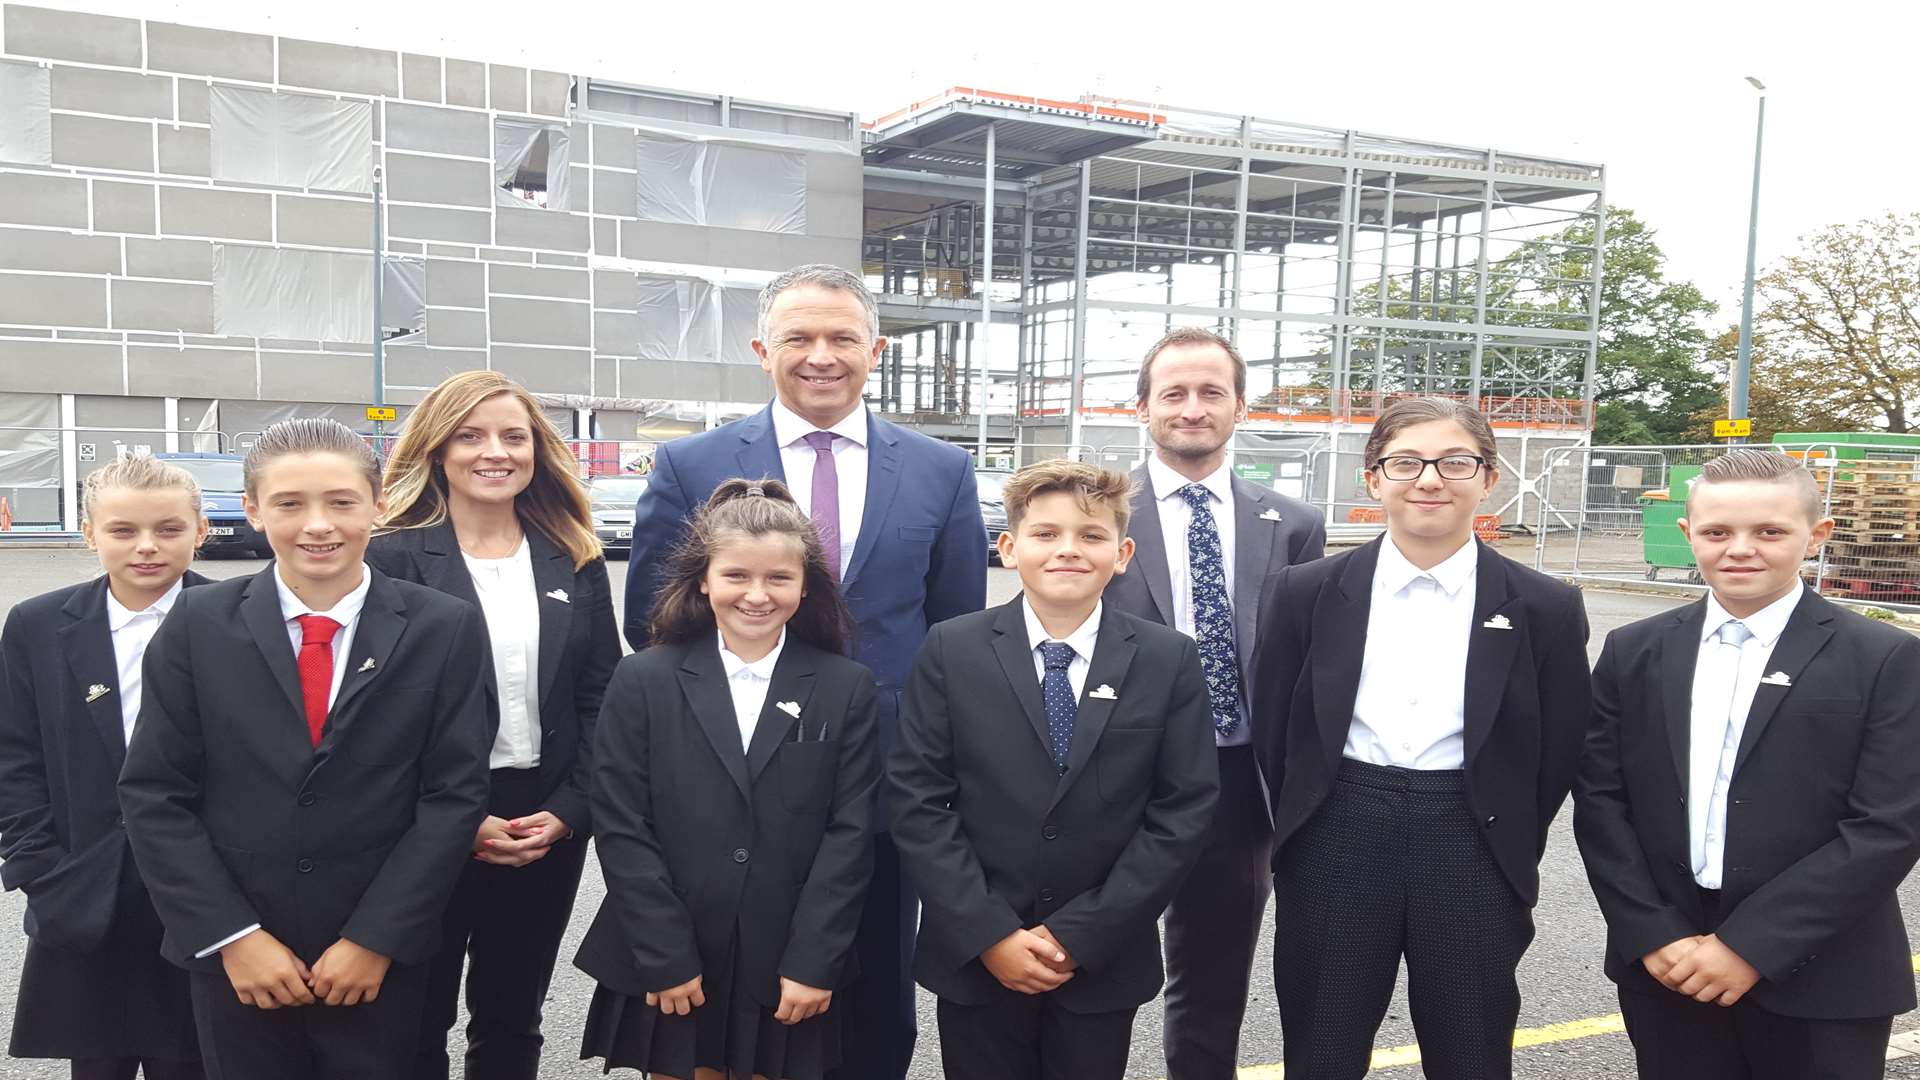 Head of college Carina Lindars; Steve Leahey, principal; and Neil Arnould, assistant head of college; with pupils in front of what will become Inspiration Academy